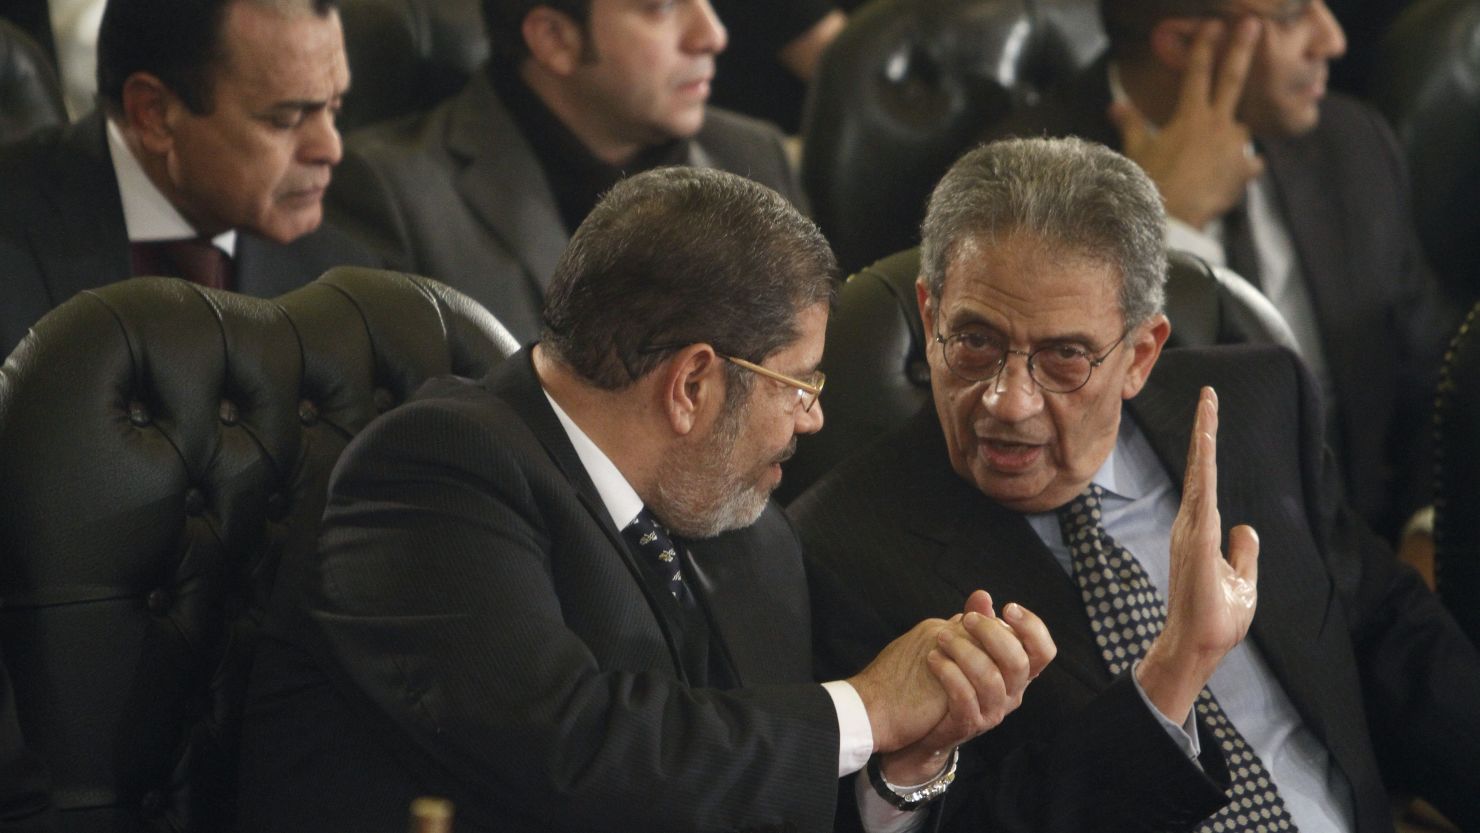 Leader of the Freedom and Justice Party, Mohamed Morsi (left).